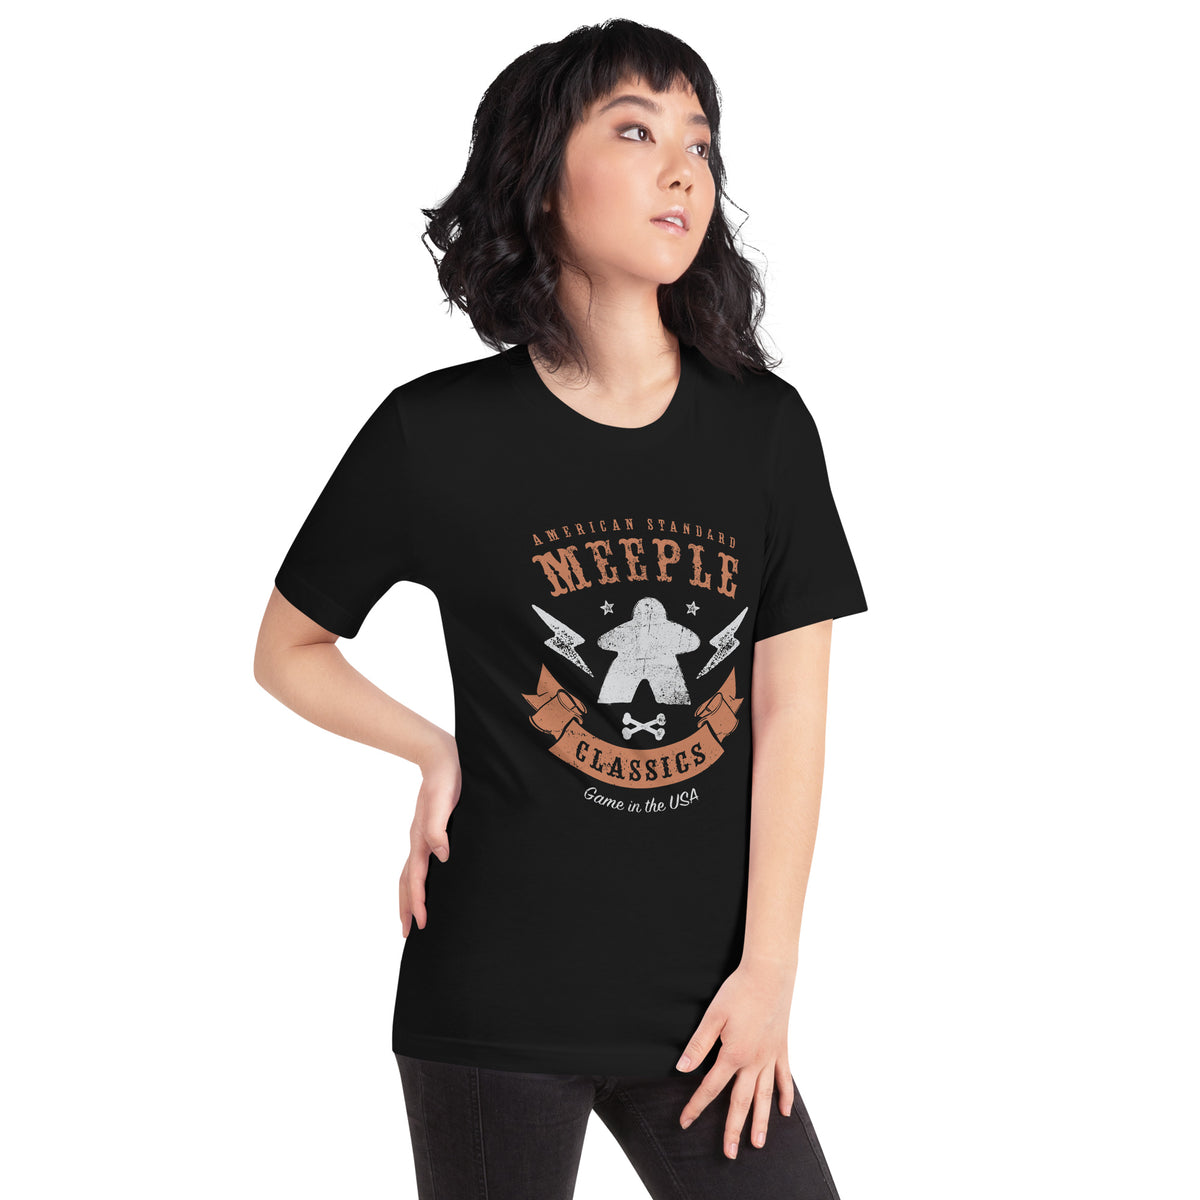 American Meeple Classics design on a black t-shirt worn by a female model